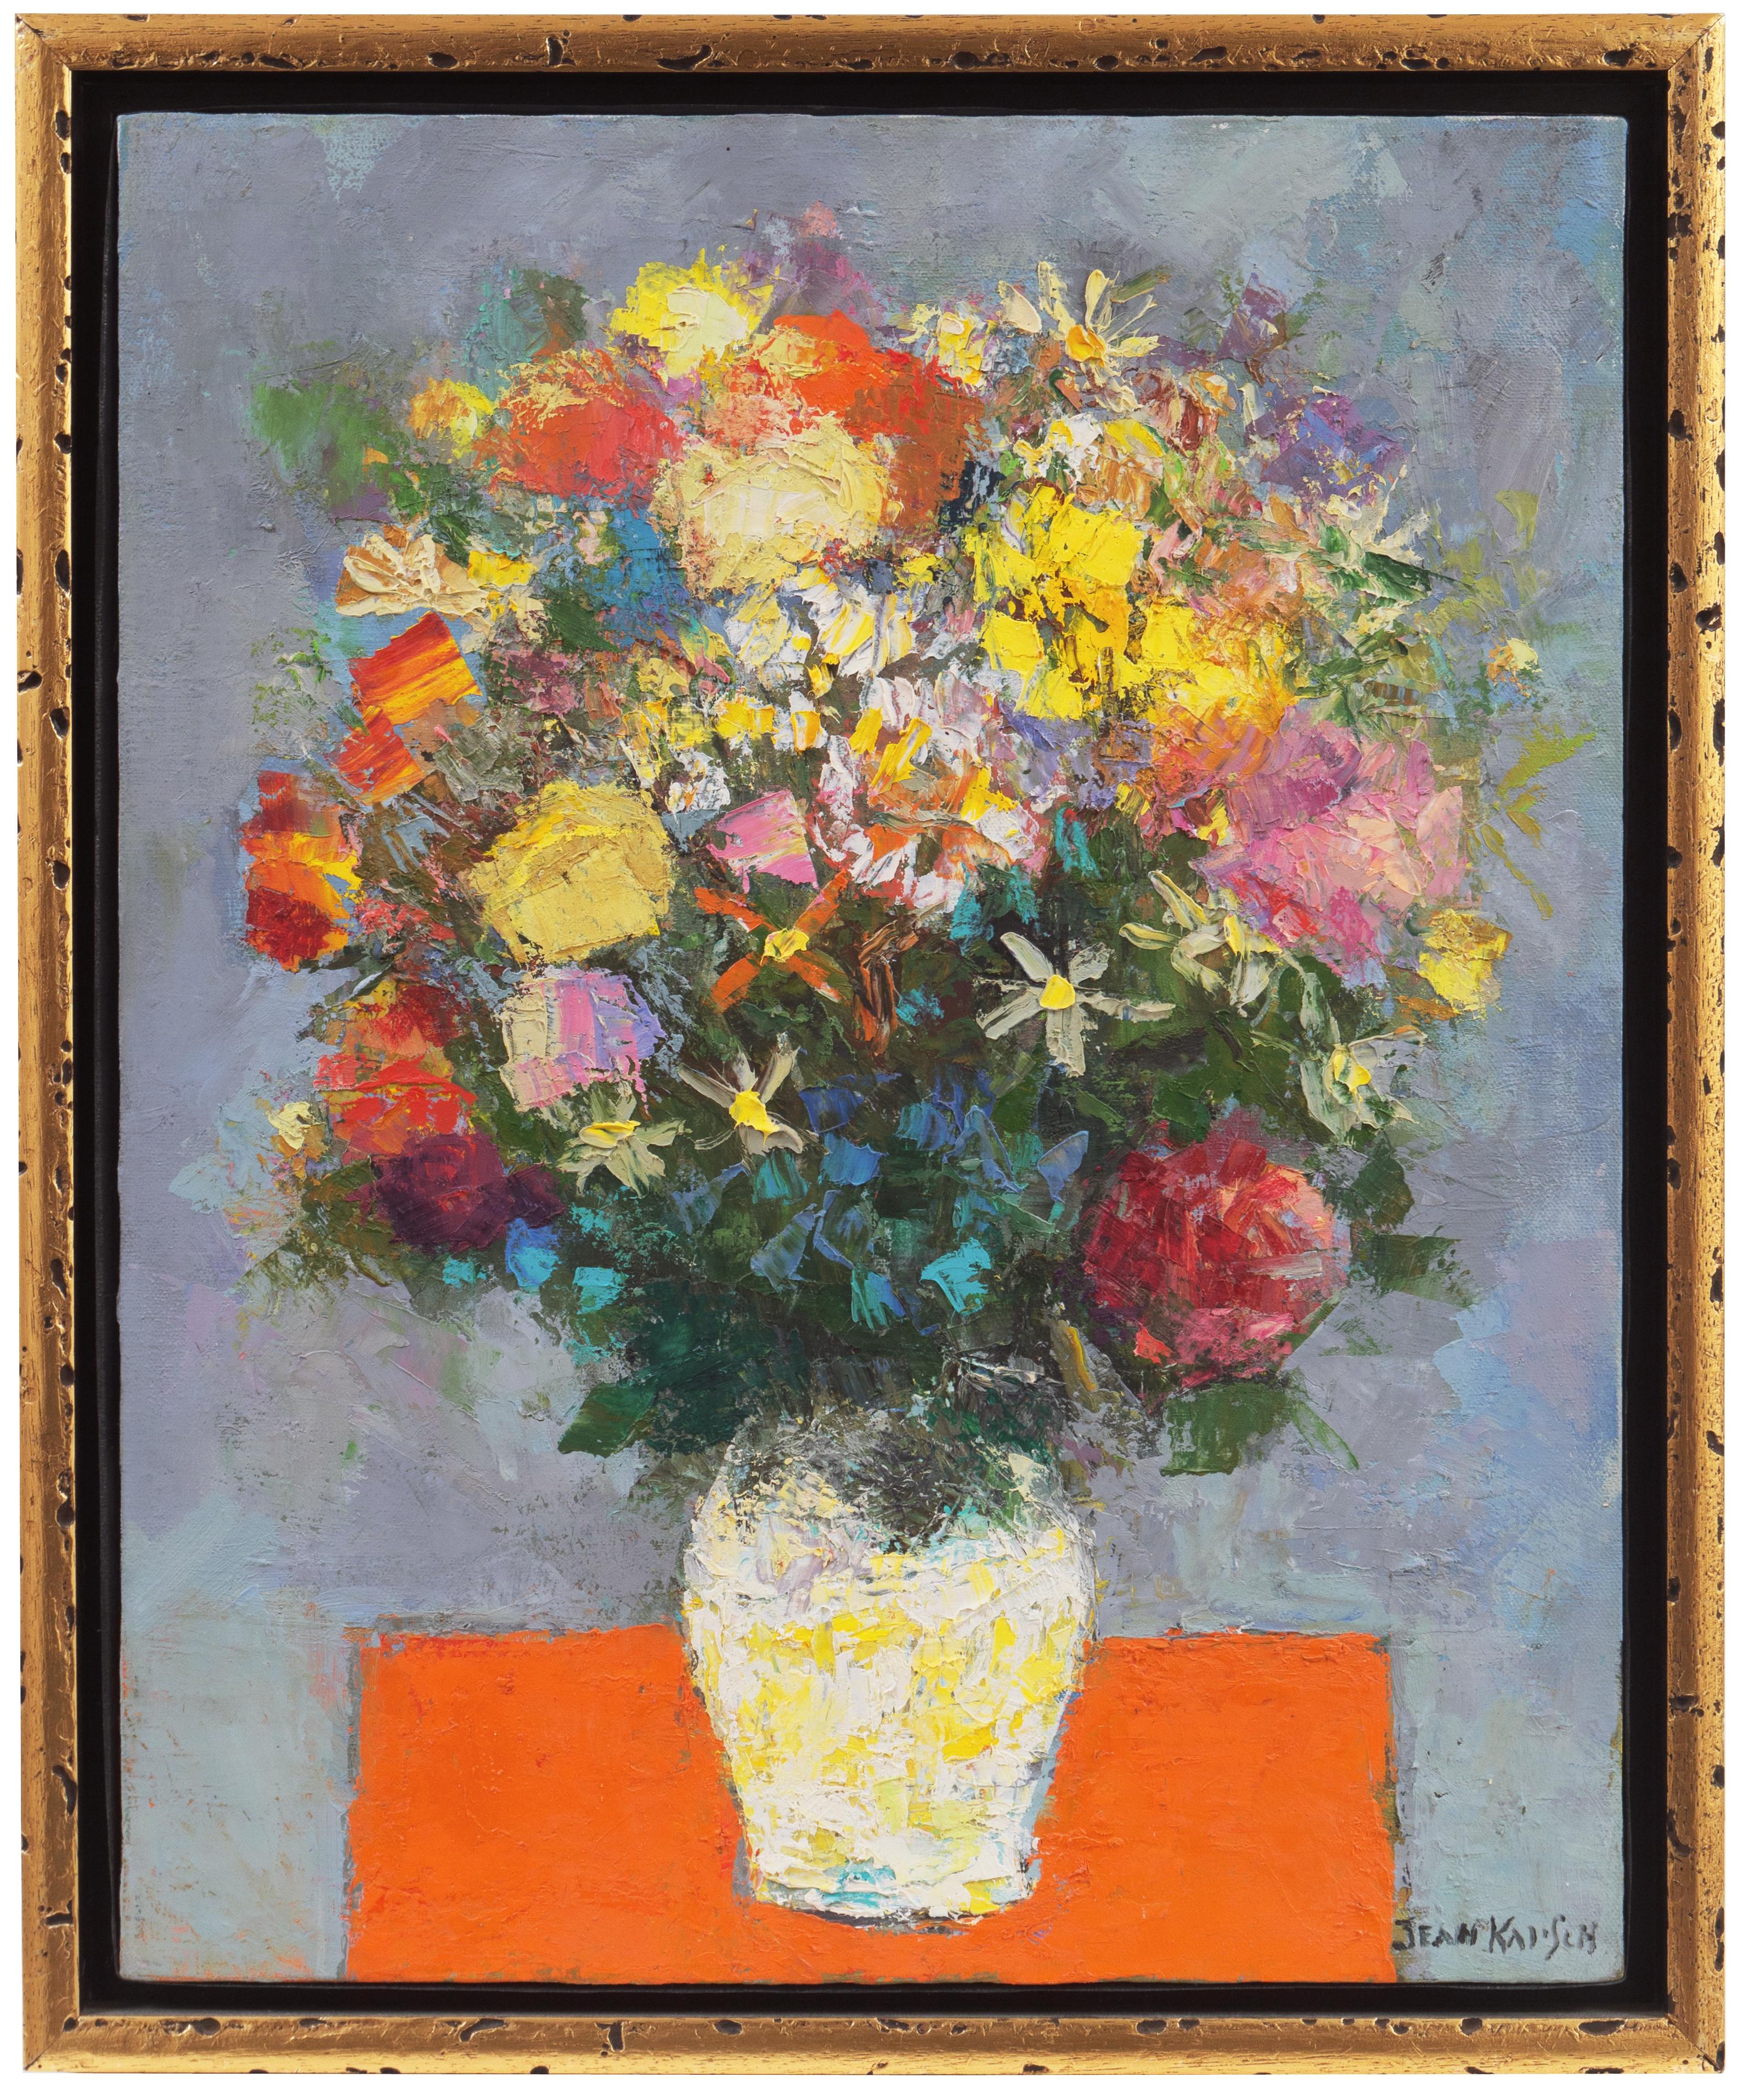 'Spring Bouquet', 1950's, San Francisco Bay Area, Woman artist, Tokyo, Japan  - Painting by Jean Kalisch